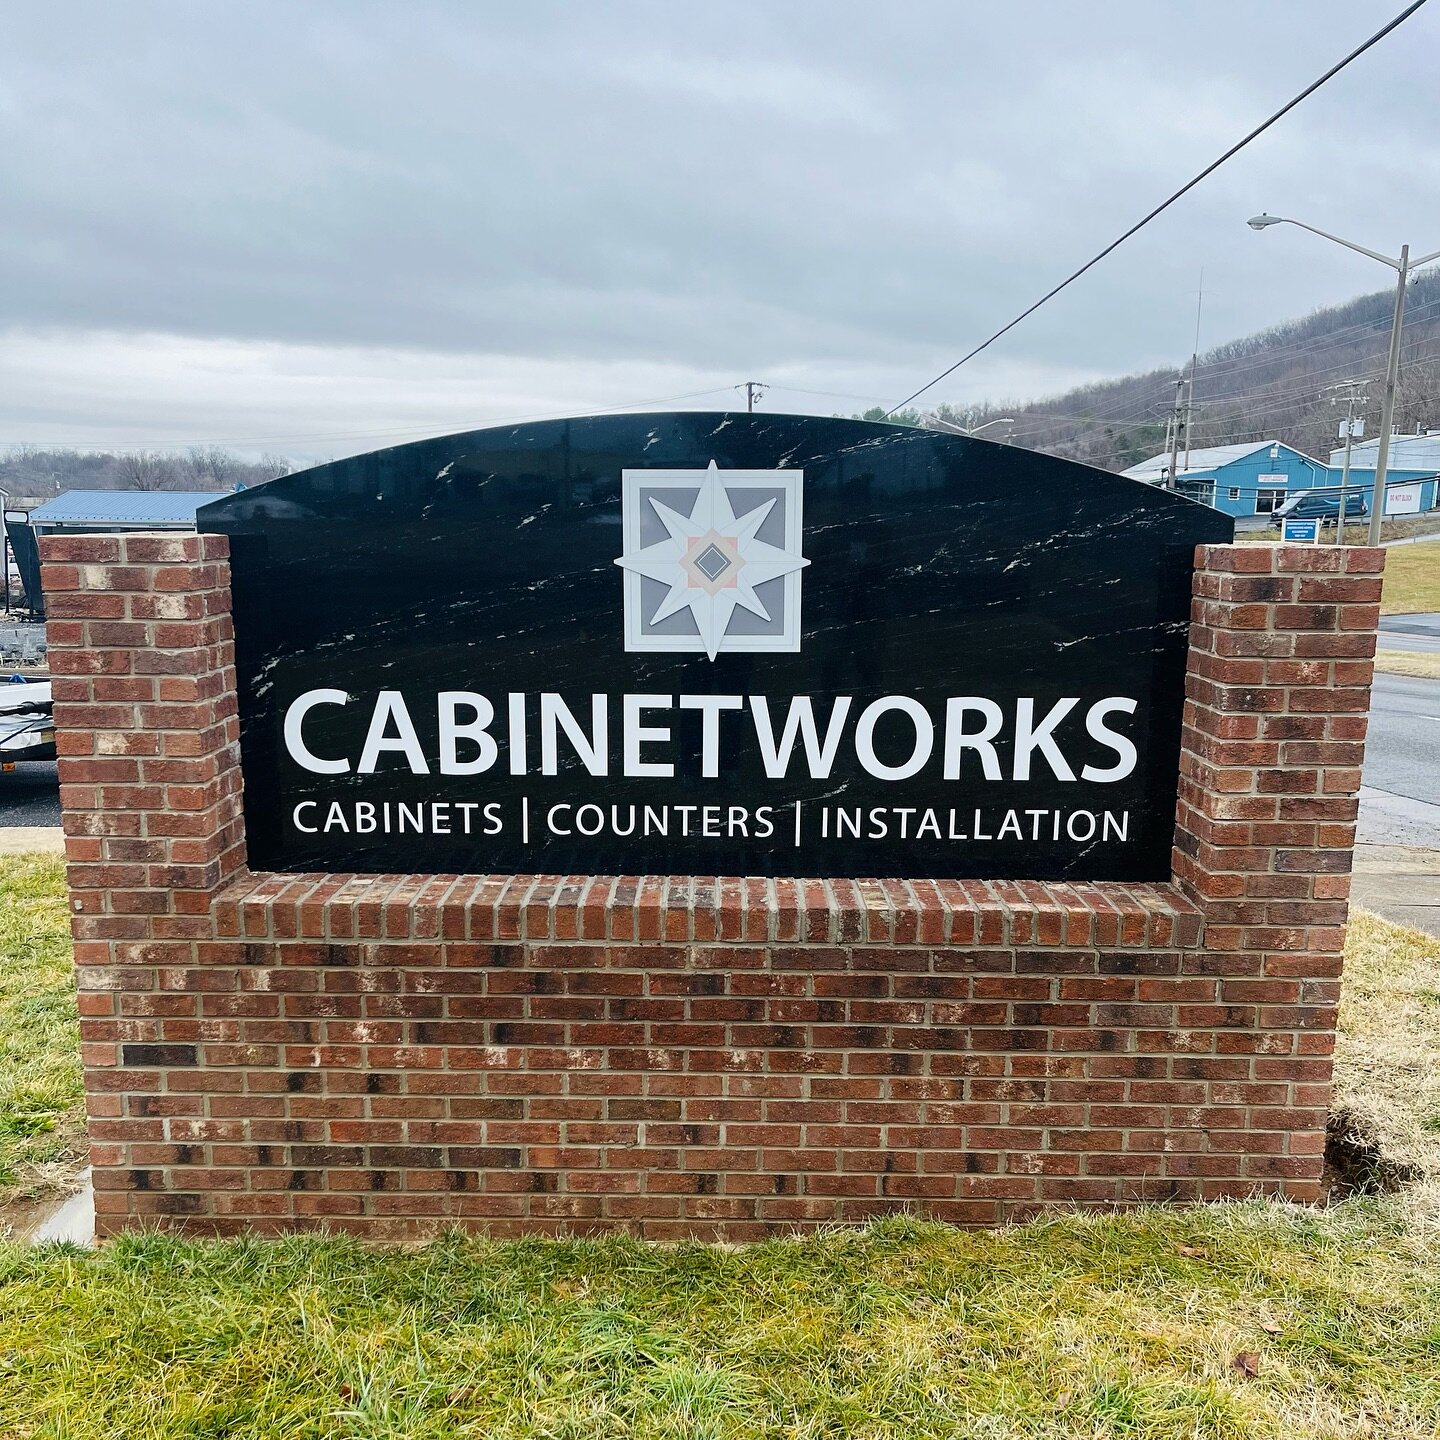 Cabinetworks supplied the granite and we provided the signage! 🫡

We can work around what you have! Want to spruce up your sign? Contact us today with the link in our bio

#MuddyFeetGraphics | #Leaveatrail